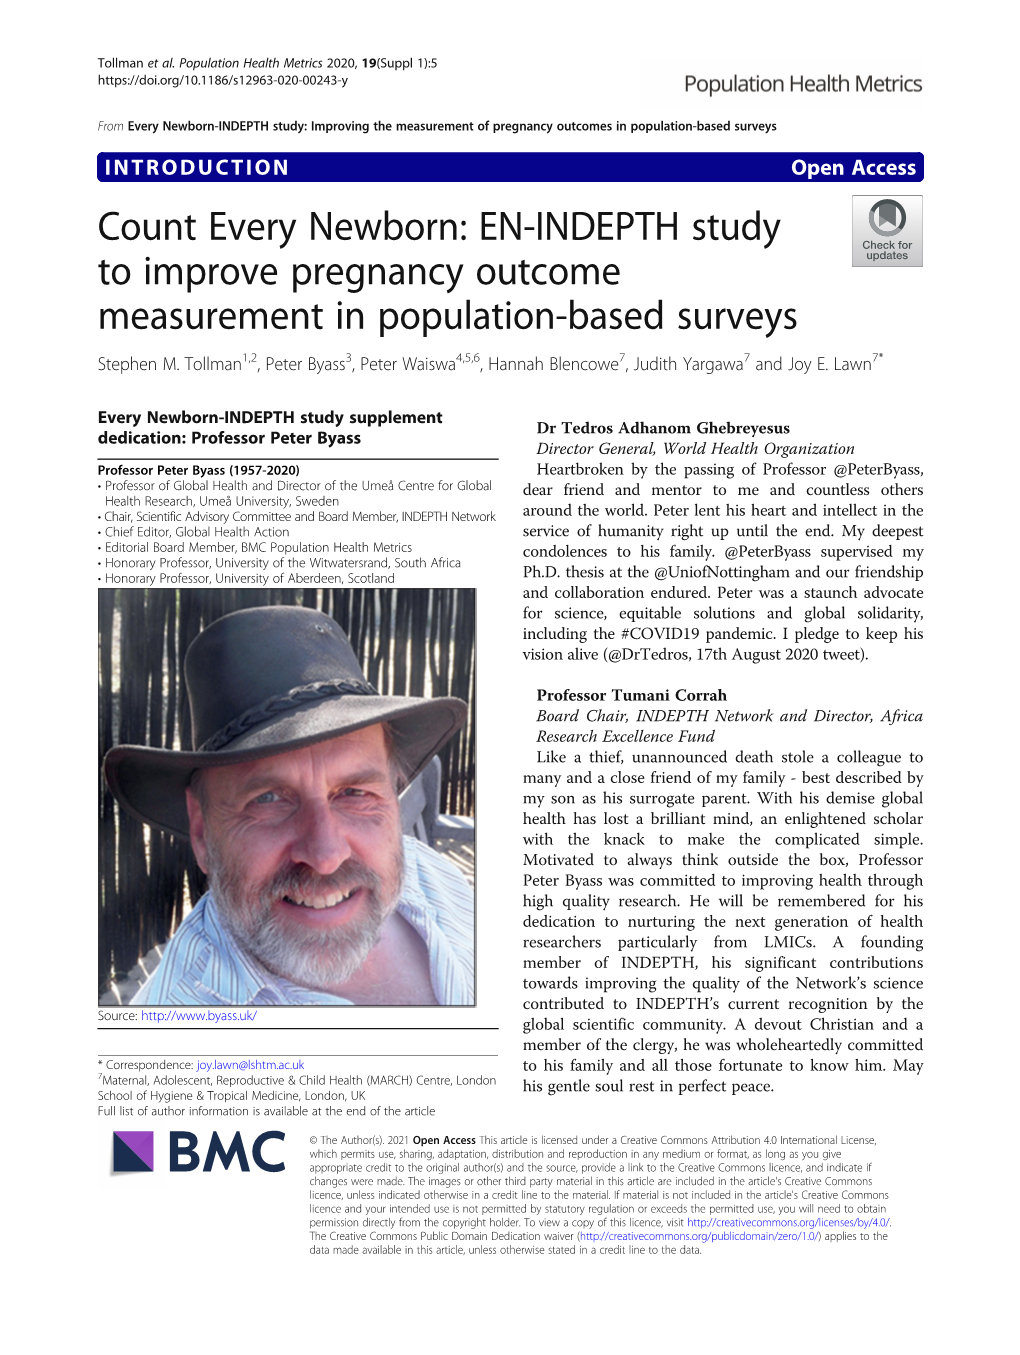 Count Every Newborn: EN-INDEPTH Study to Improve Pregnancy Outcome Measurement in Population-Based Surveys Stephen M